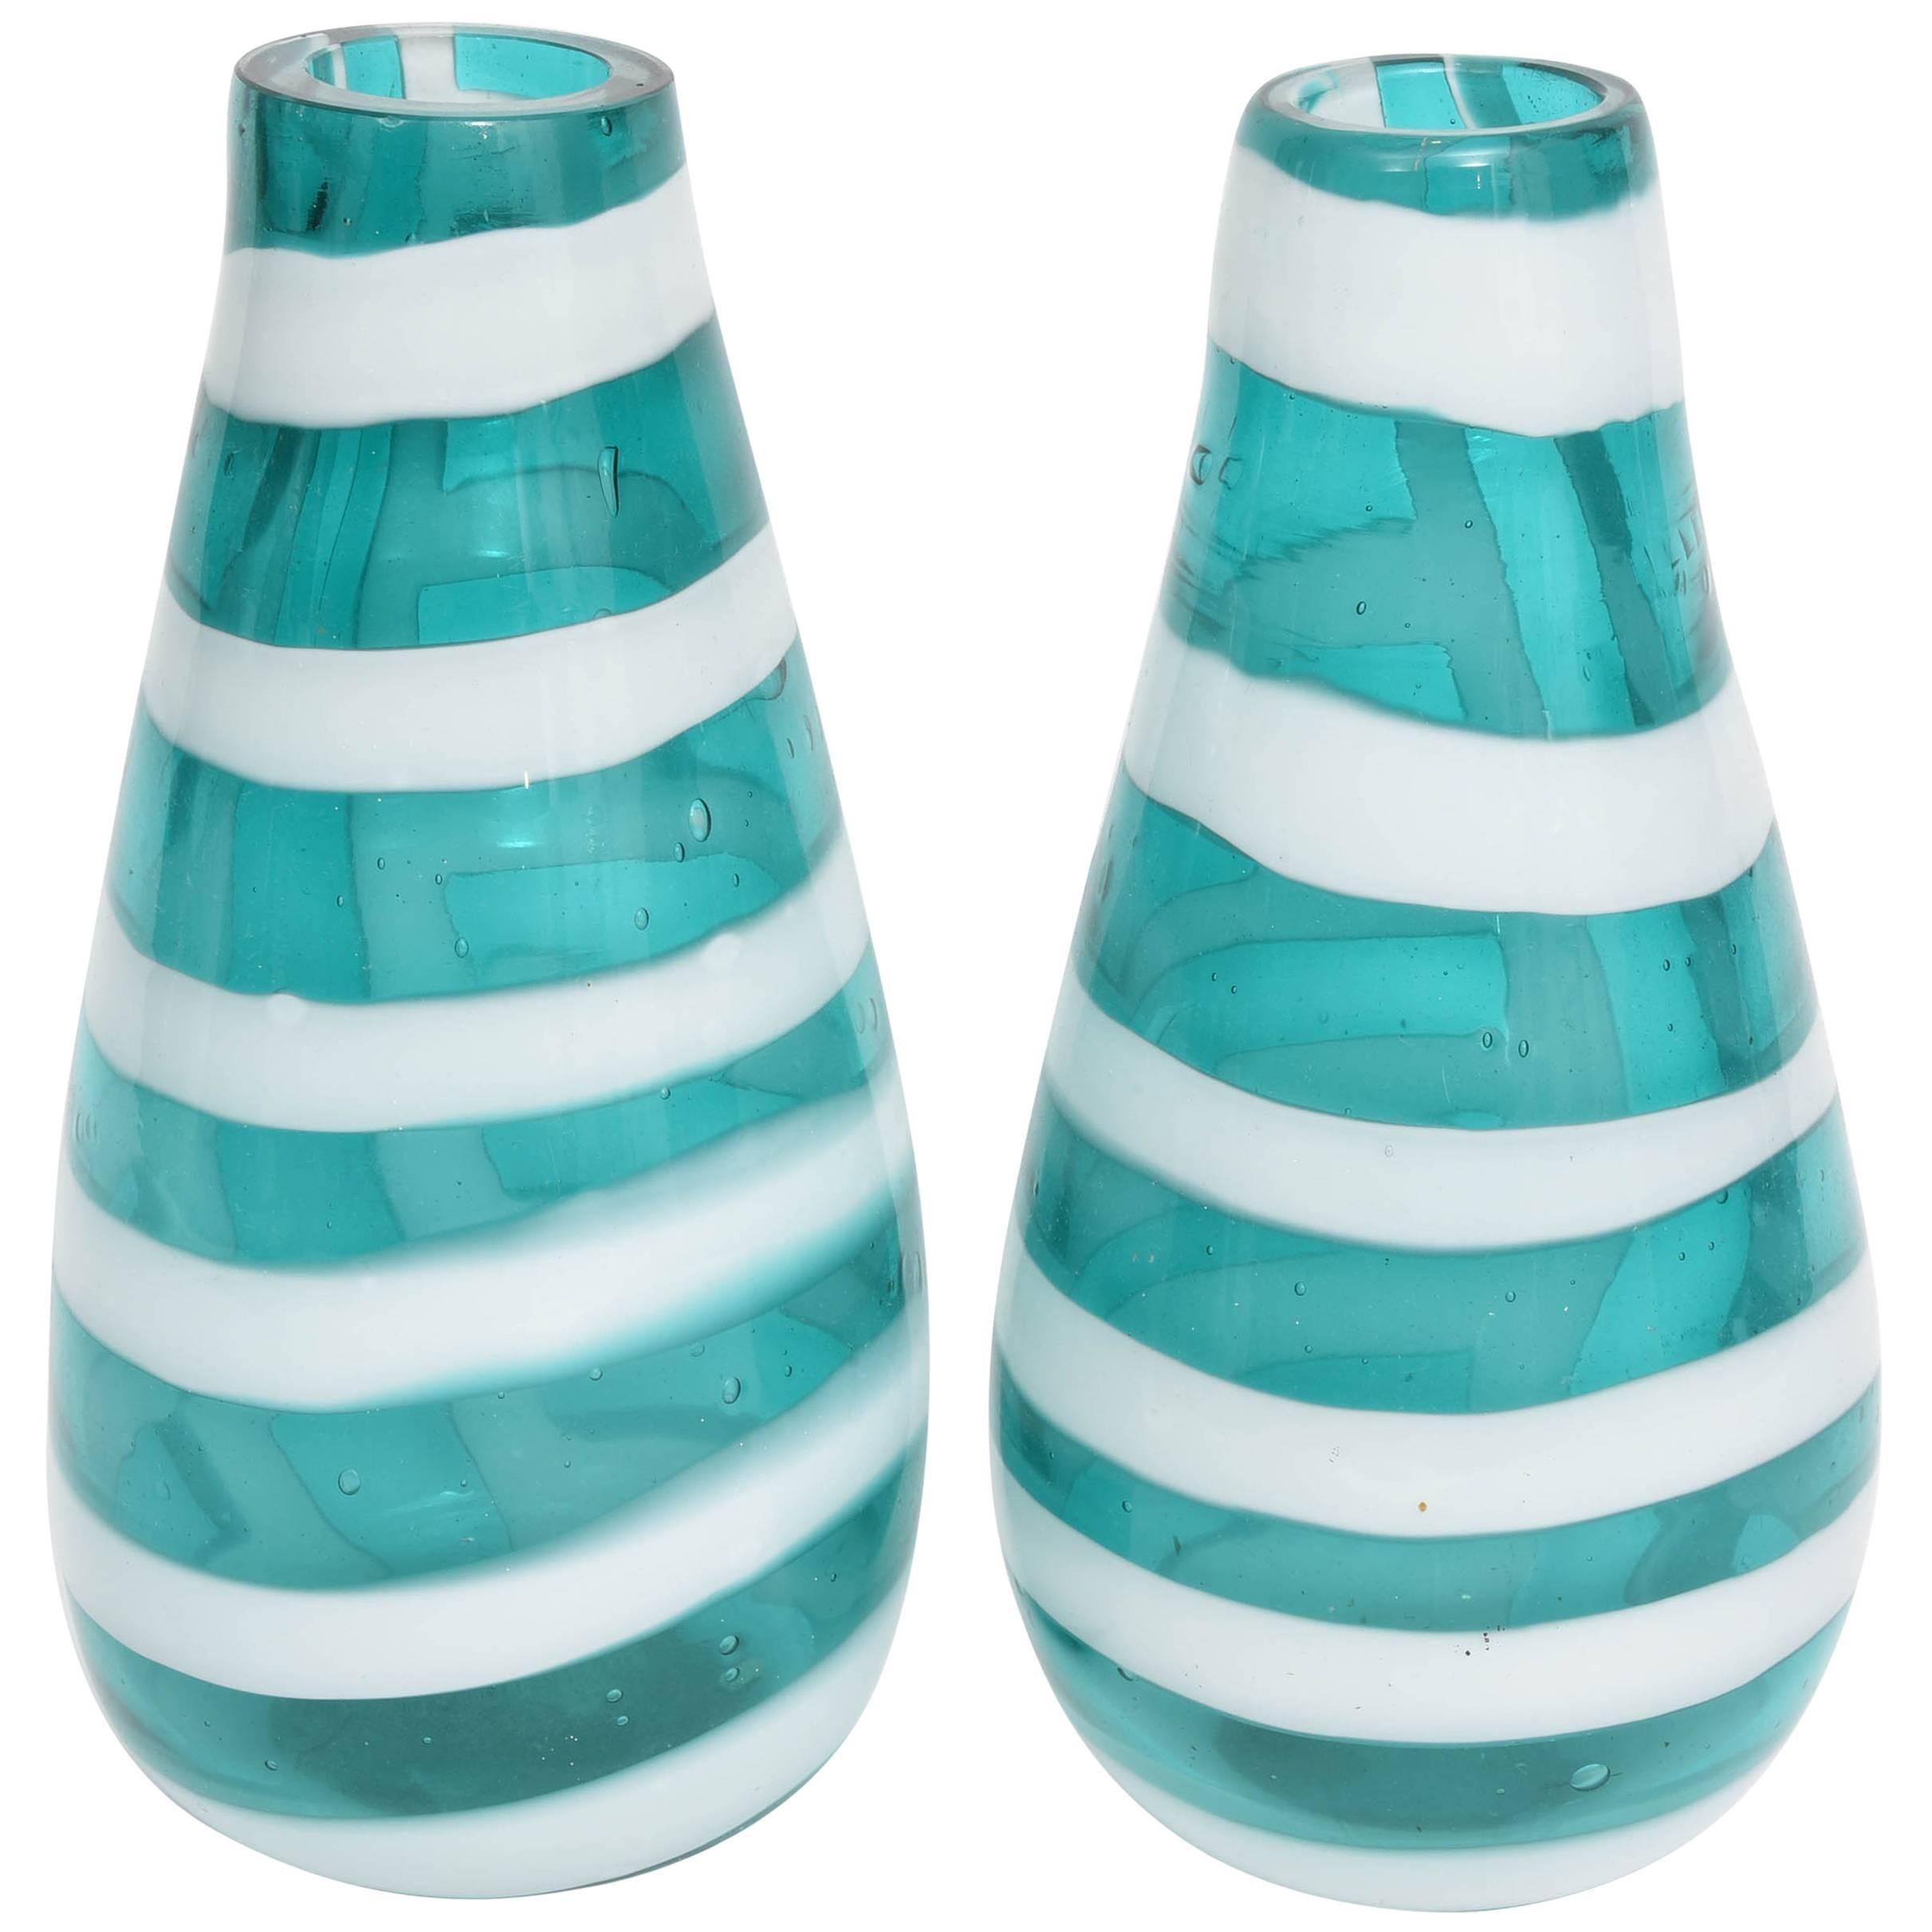 Pair of Murano Striped Glass Vases, Fulvio Bianconi for Cenedese, Italy, 1958